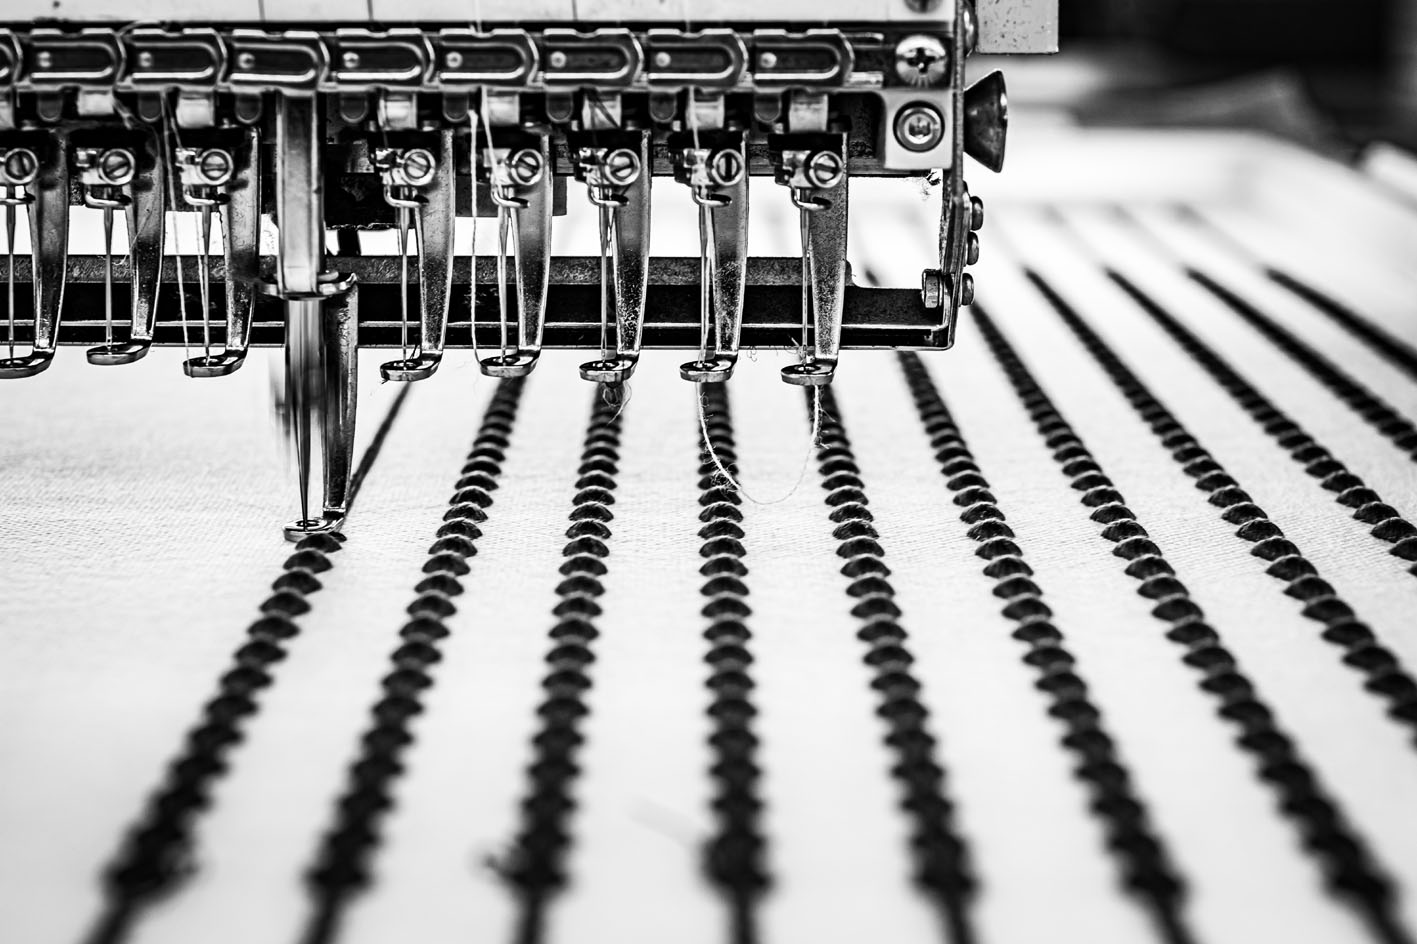 The 3D threads are neither woven or knitted, but manufactured in a single strings on the embroidery machine.